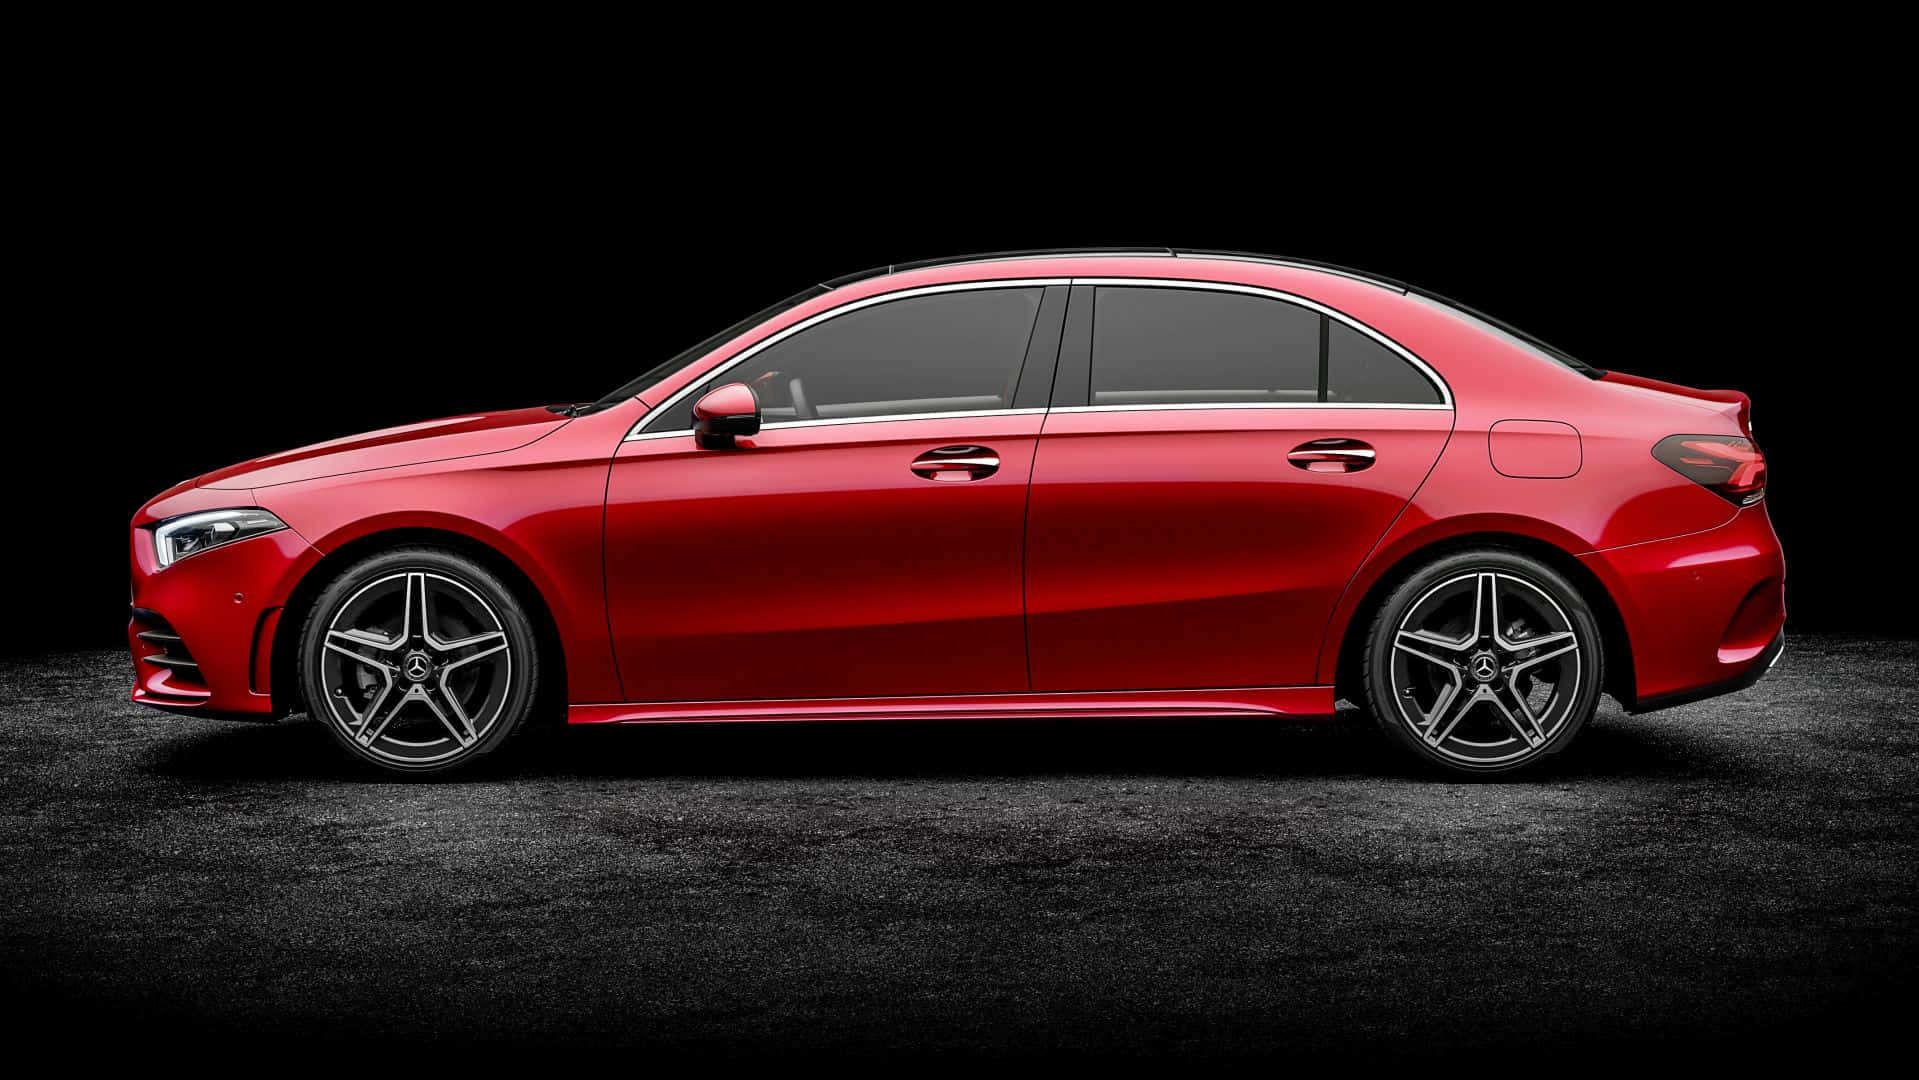 Experience the Ultimate Sophistication - Mercedes Benz A-Class Wallpaper